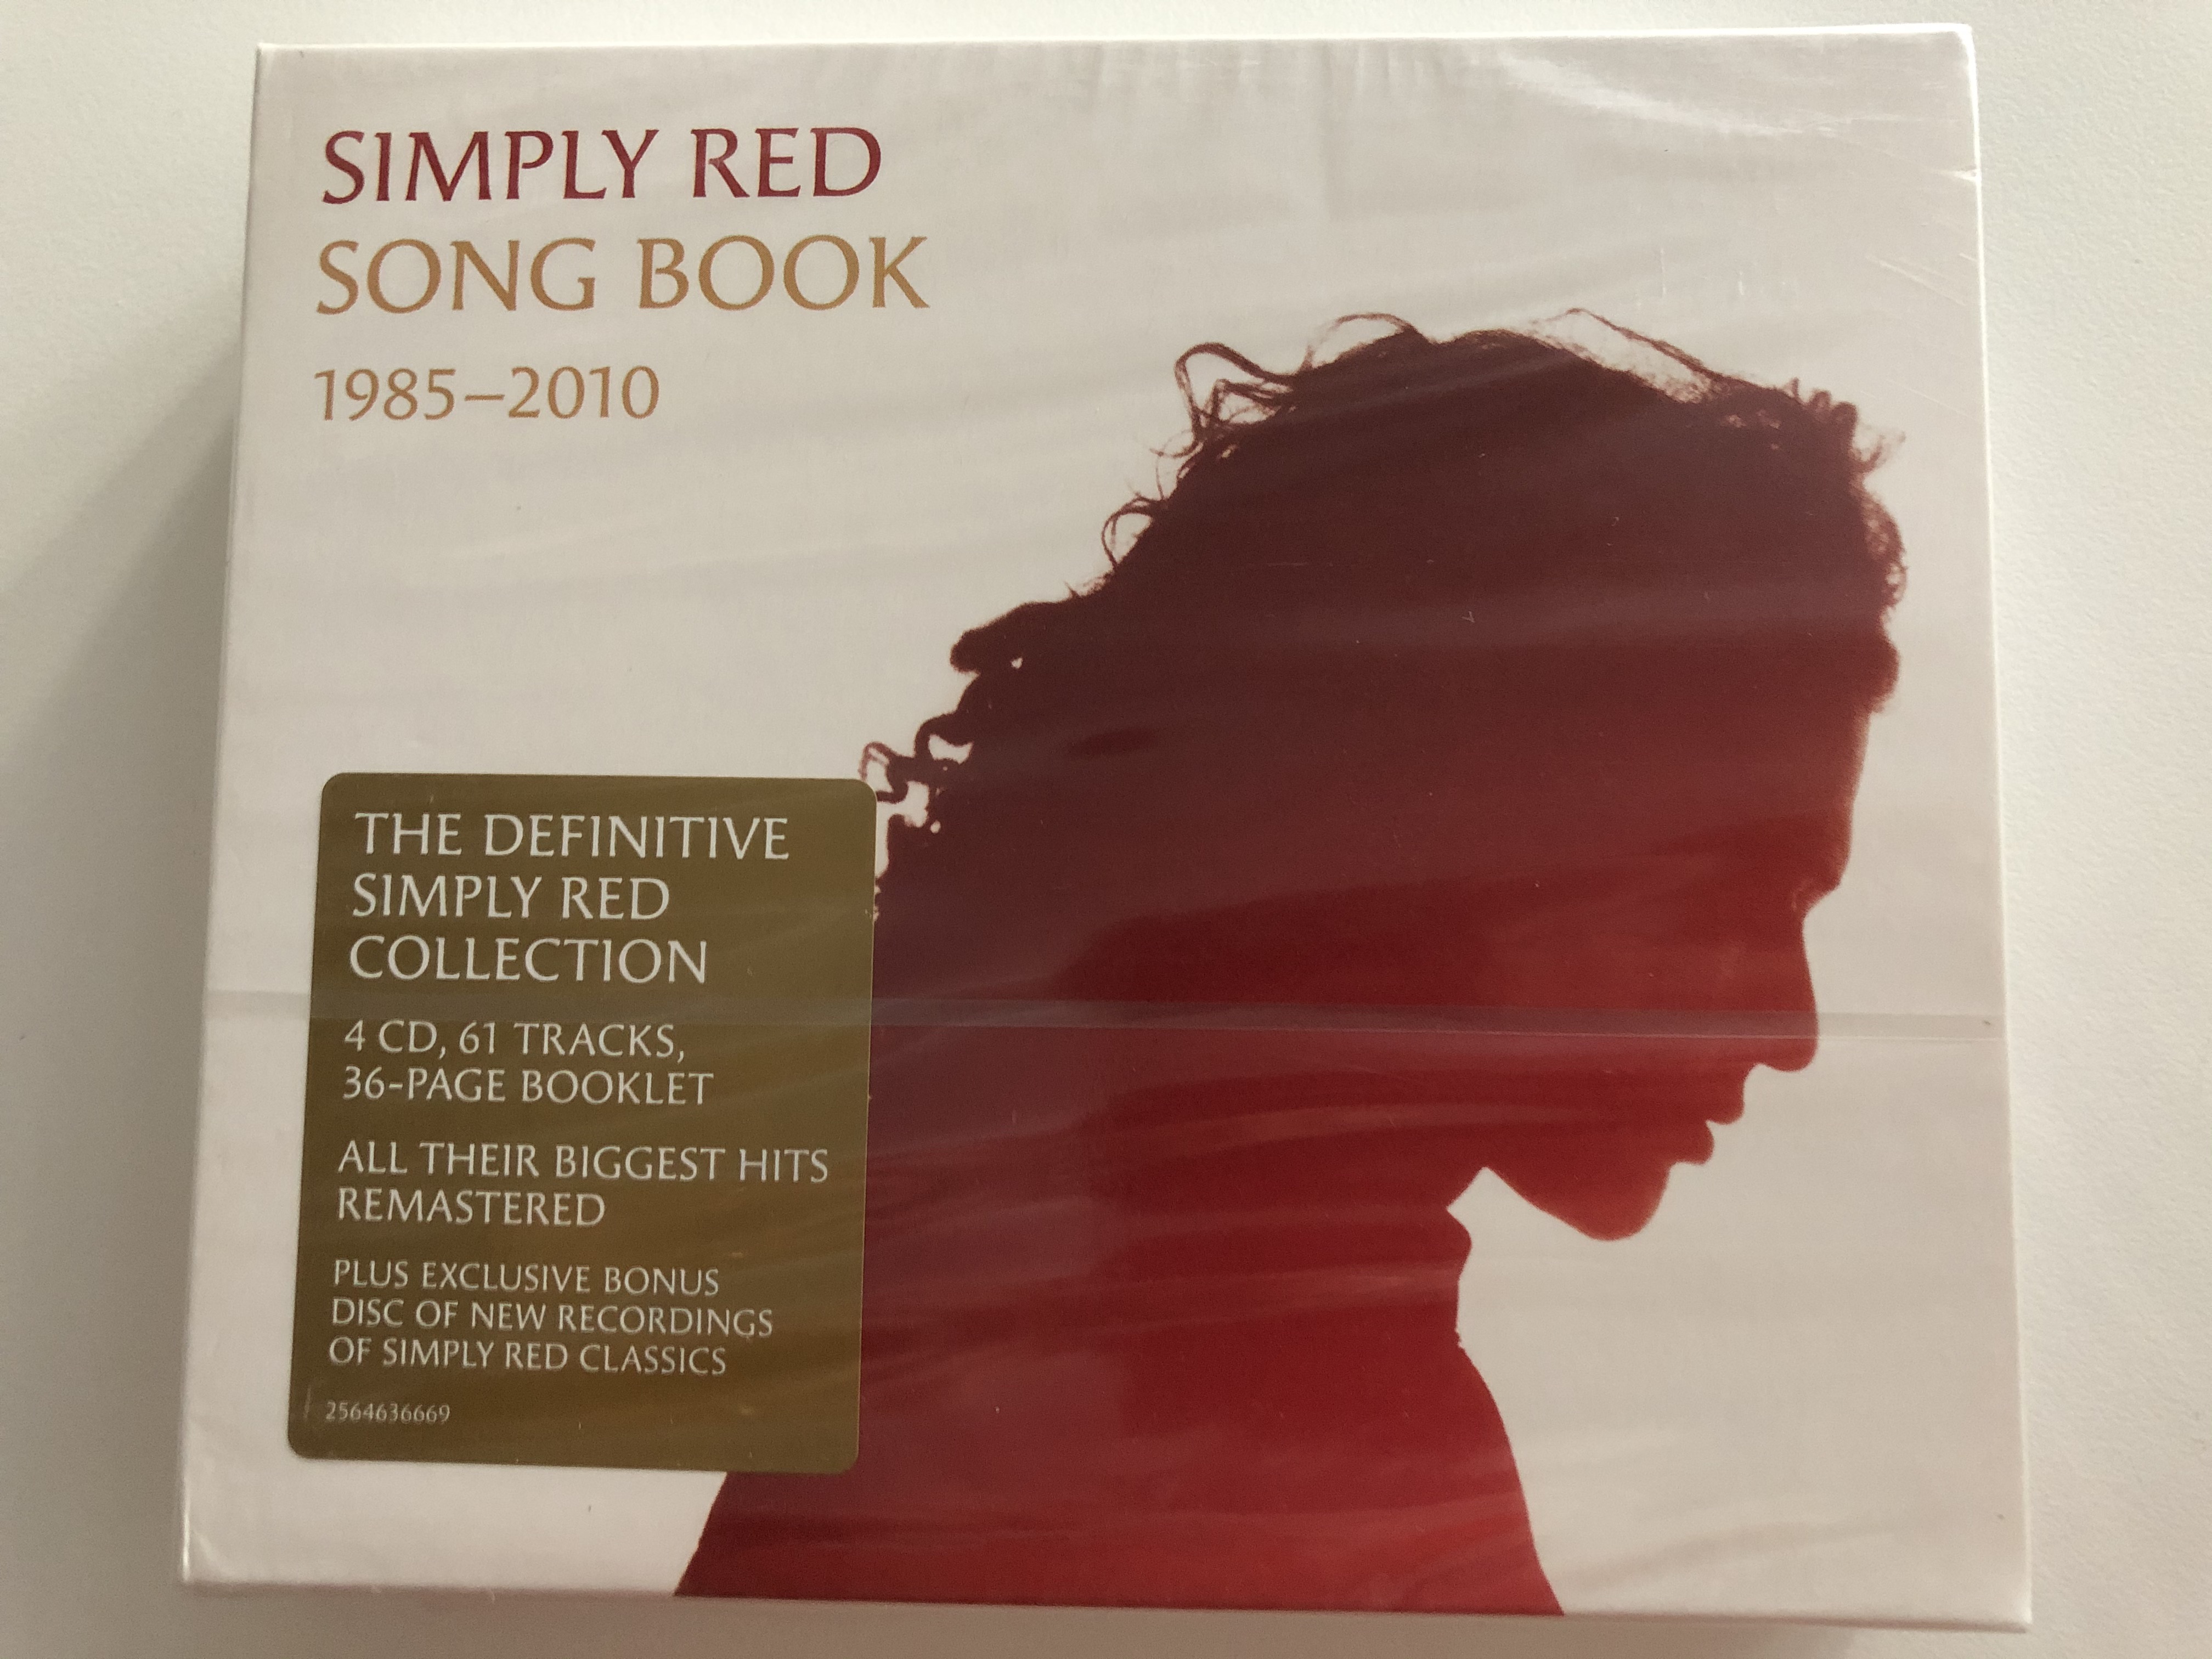 simply-red-song-book-1985-2010-the-definitive-simply-red-collection-4cd-61-tracks-36-page-booklet-all-their-biggest-hits-ramastered-rhino-records-4x-audio-cd-2013-825646366699-1-.jpg